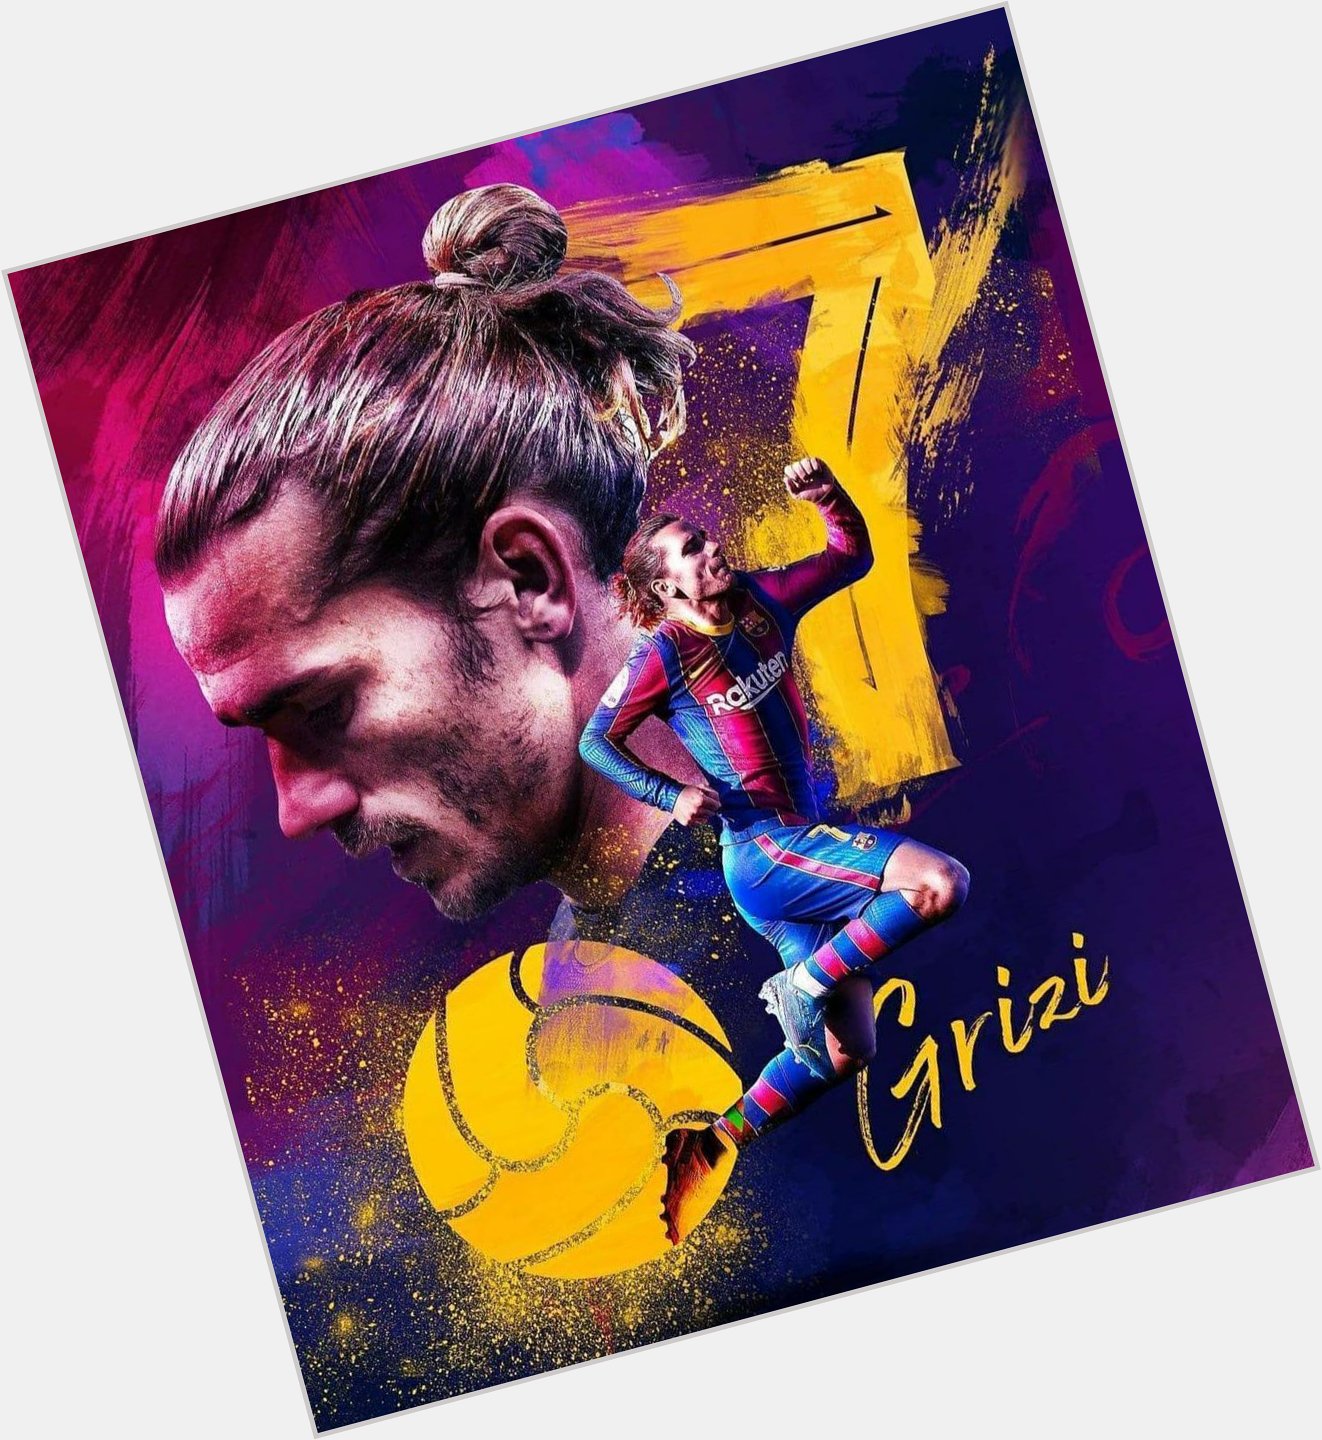   Antoine Griezmann is 30 today!  Happy birthday for prince 